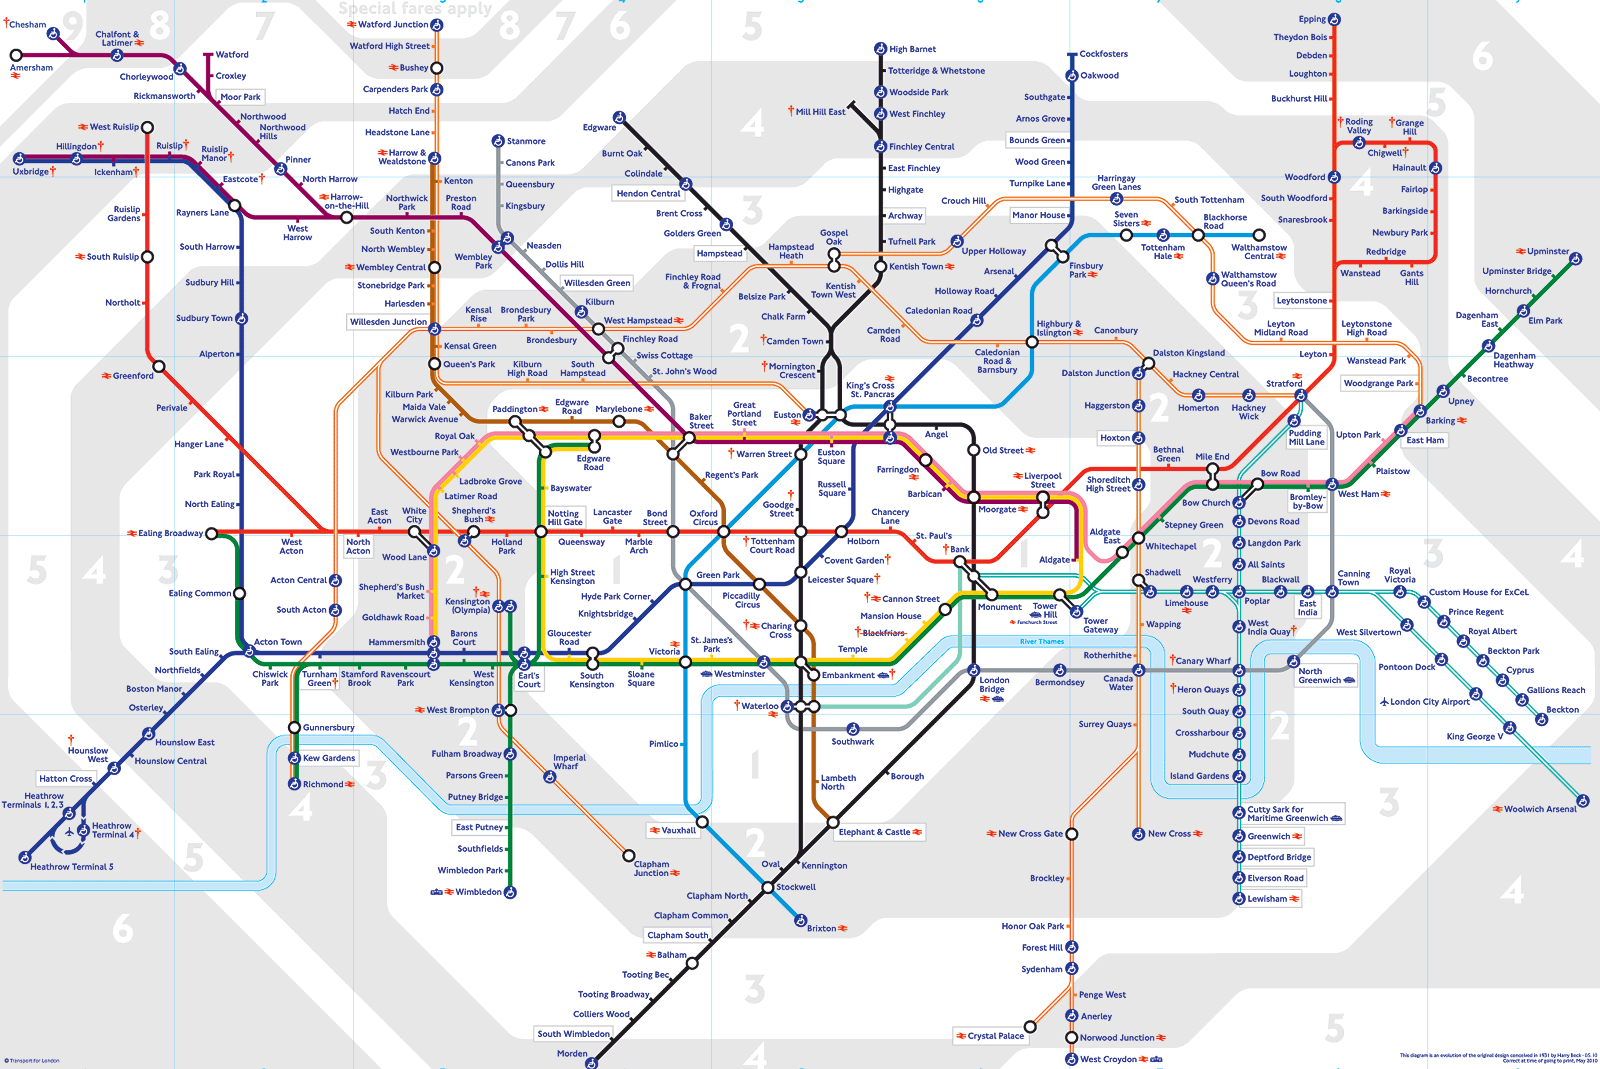 A London Map of the Underground published by TFL